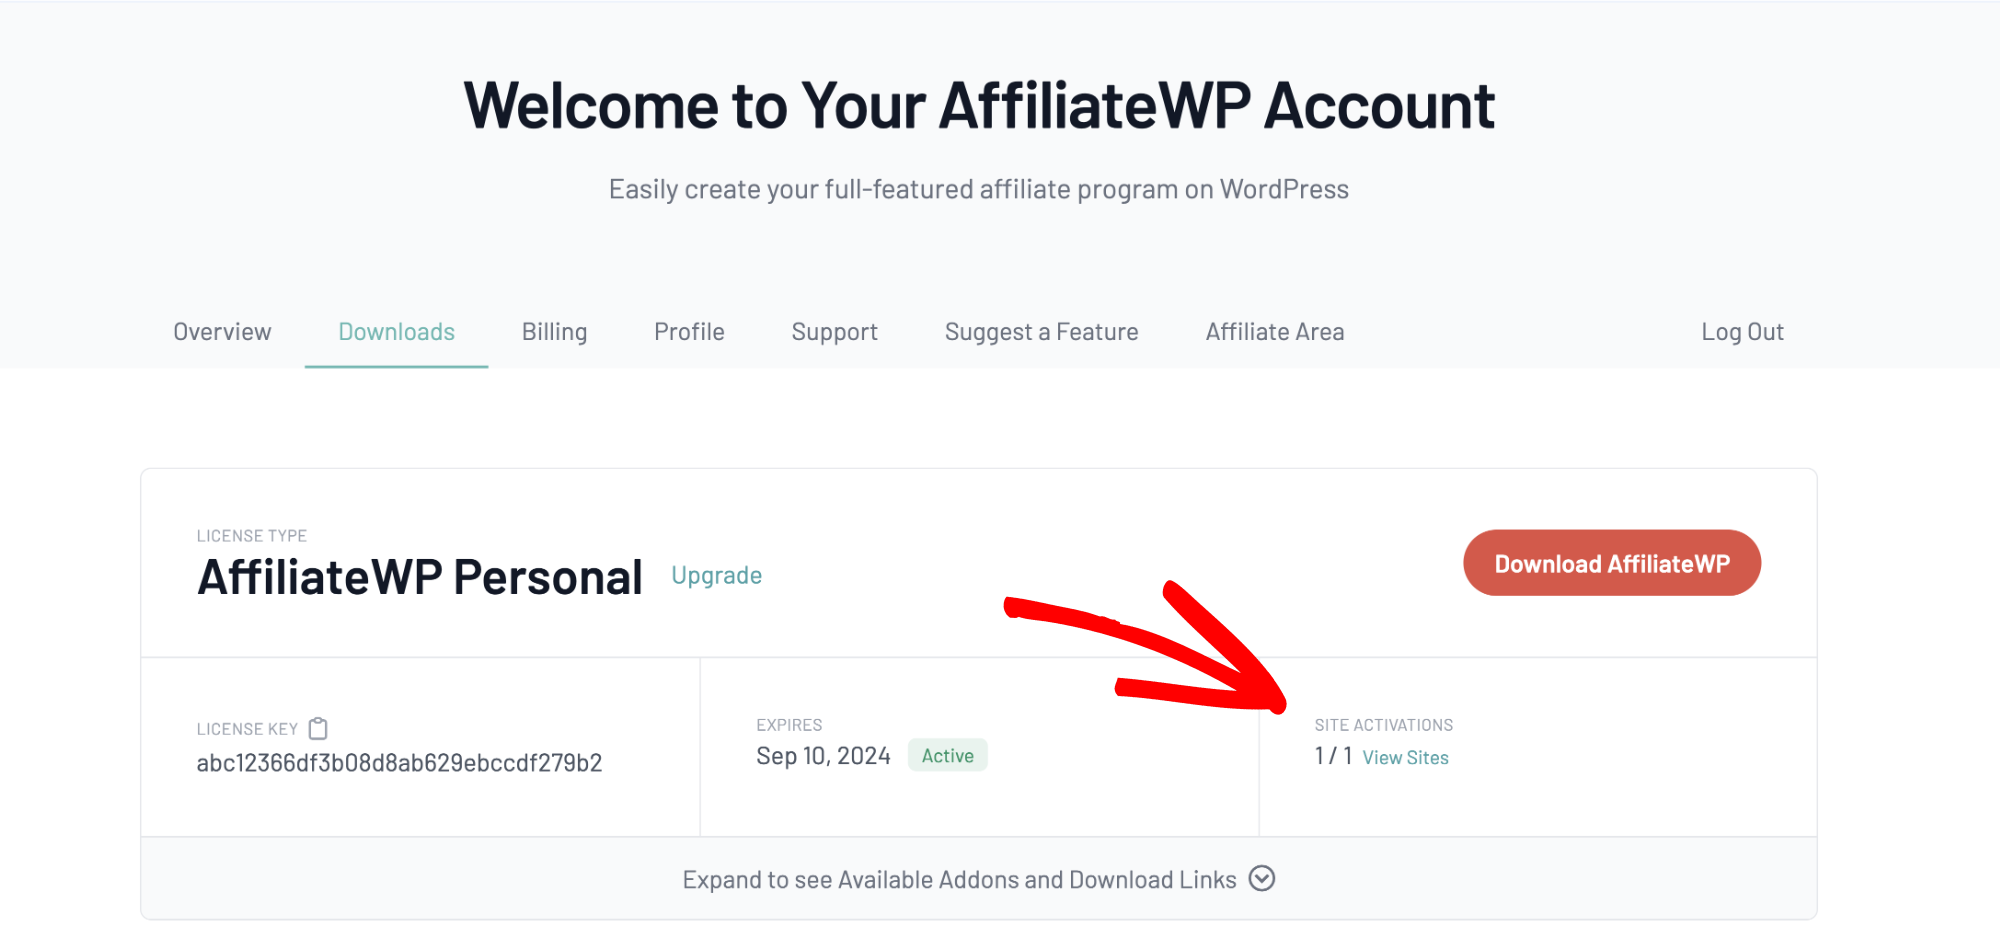 Checking the license site activations on the AffiliateWP account Downloads page